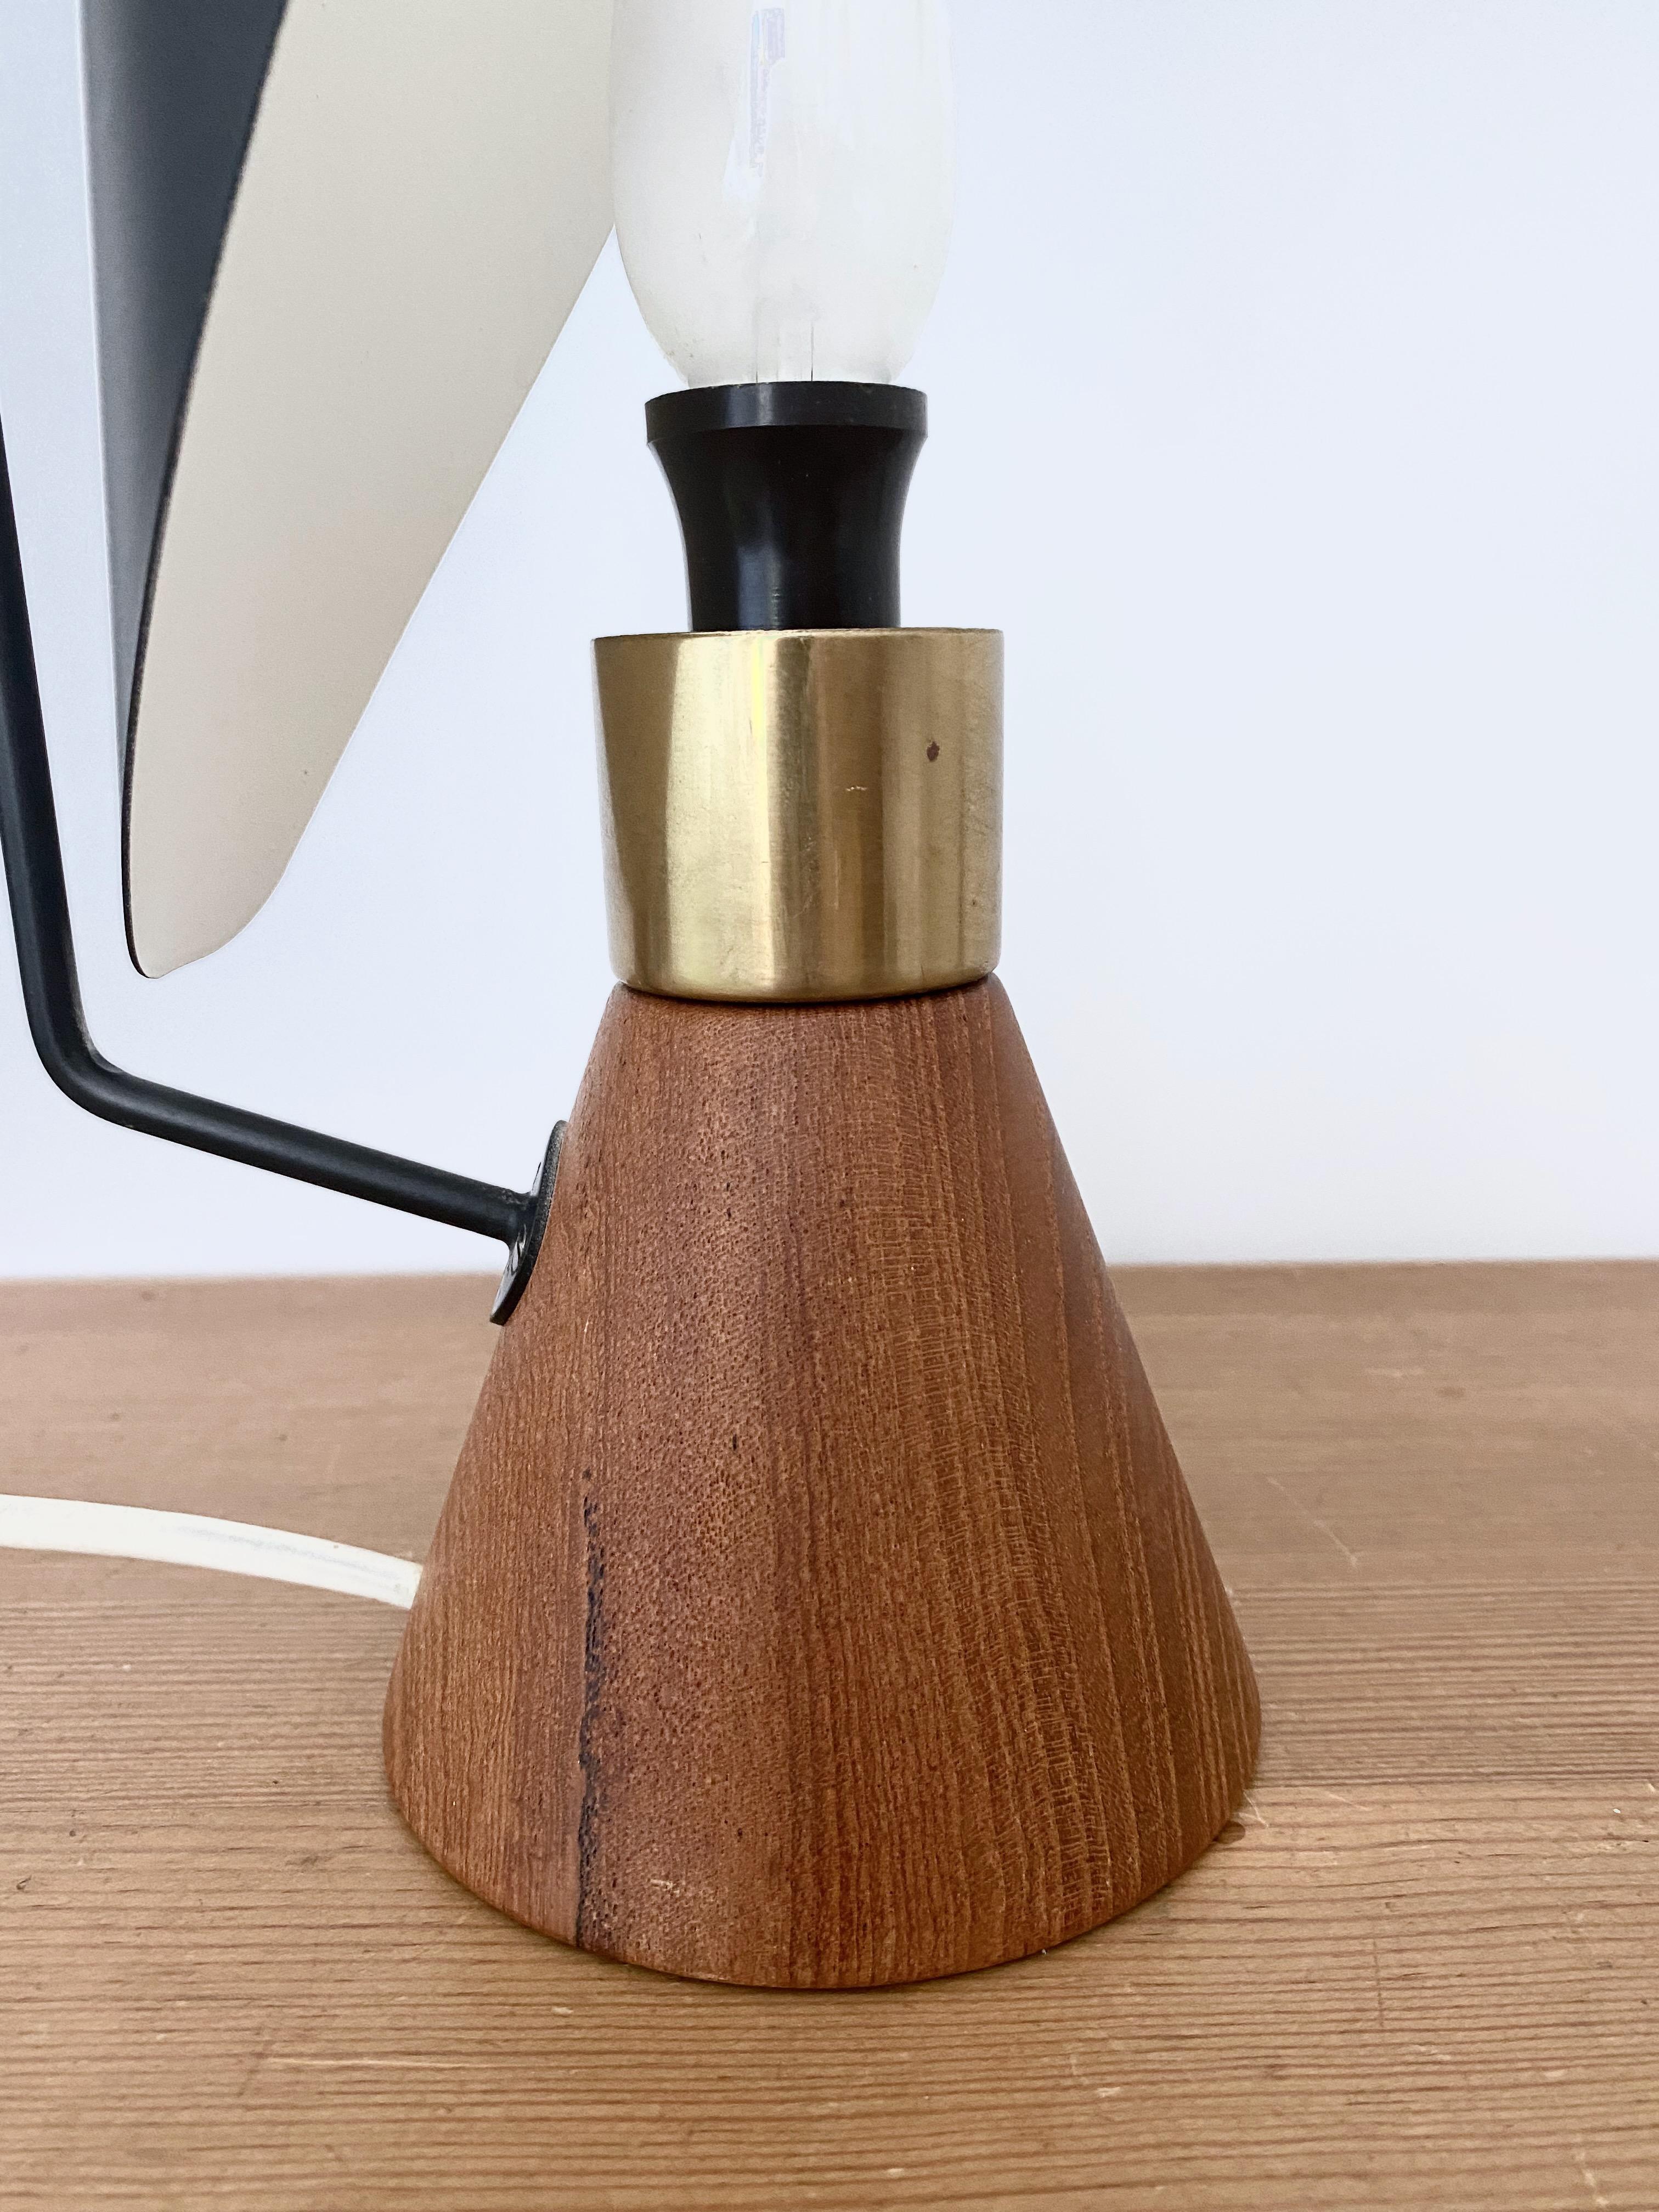 1950s Table Lamp by Svend Aage Holm-sørensen for ASEA In Good Condition For Sale In Brooklyn, NY